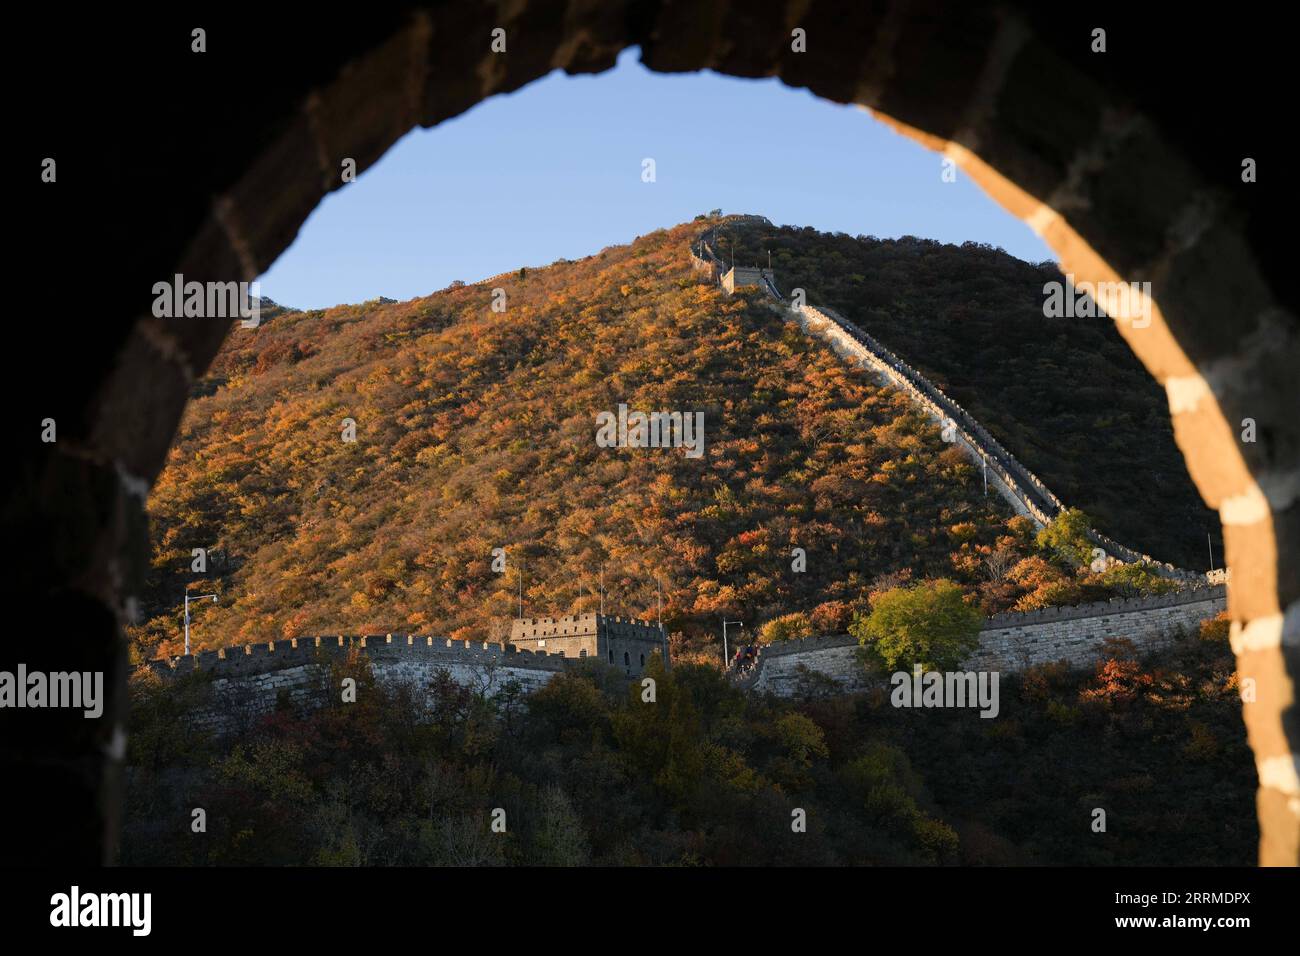 221023 -- BEIJING, Oct. 23, 2022 Xinhua -- This photo taken on Oct. 22, 2022 shows the scenery of the Mutianyu section of the Great Wall in Beijing, capital of China. Xinhua/Ju Huanzong Beijing CHINA Weather & Environment conservation & Disasters & Accidents xx *** 221023 BEIJING, Oct 23, 2022 Xinhua This photo taken on Oct 22, 2022 shows the scenery of the Mutianyu section of the Great Wall in Beijing, capital of China Xinhua Ju Huanzong Beijing CHINA Weather Environment conservation Disasters Accidents xx, PUBLICATIONxNOTxINxDENxNORxSWExFIN Copyright: xJuxHuanzongx CHINA-BEIJING-GREAT WALL-M Stock Photo